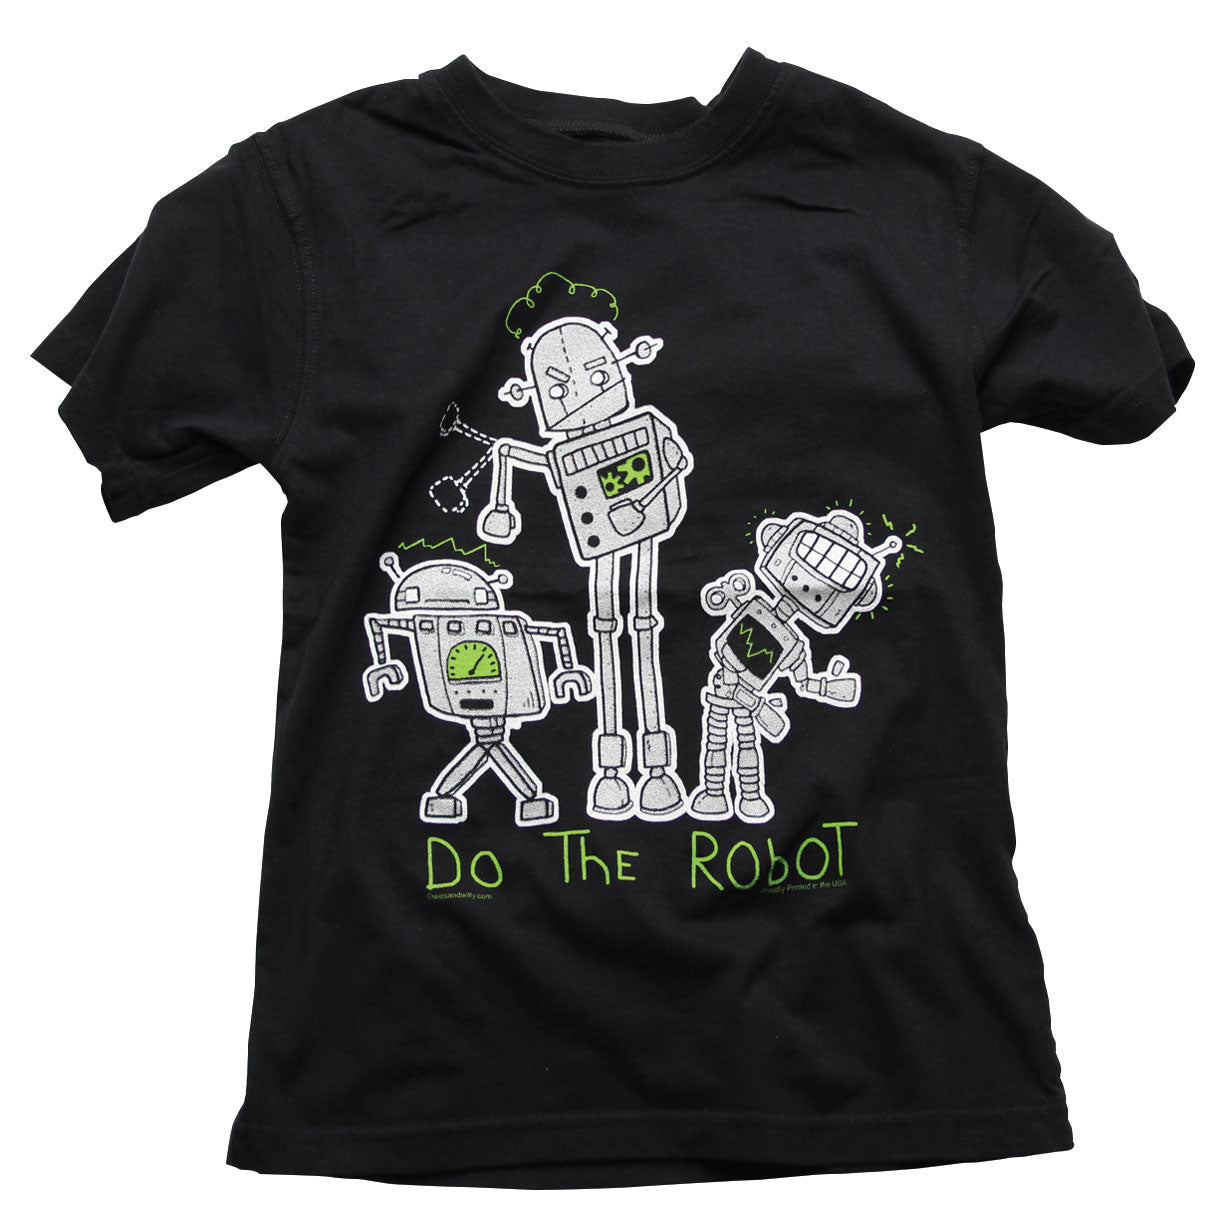 Boys' Do the Robot Shirt by Wes and Willy